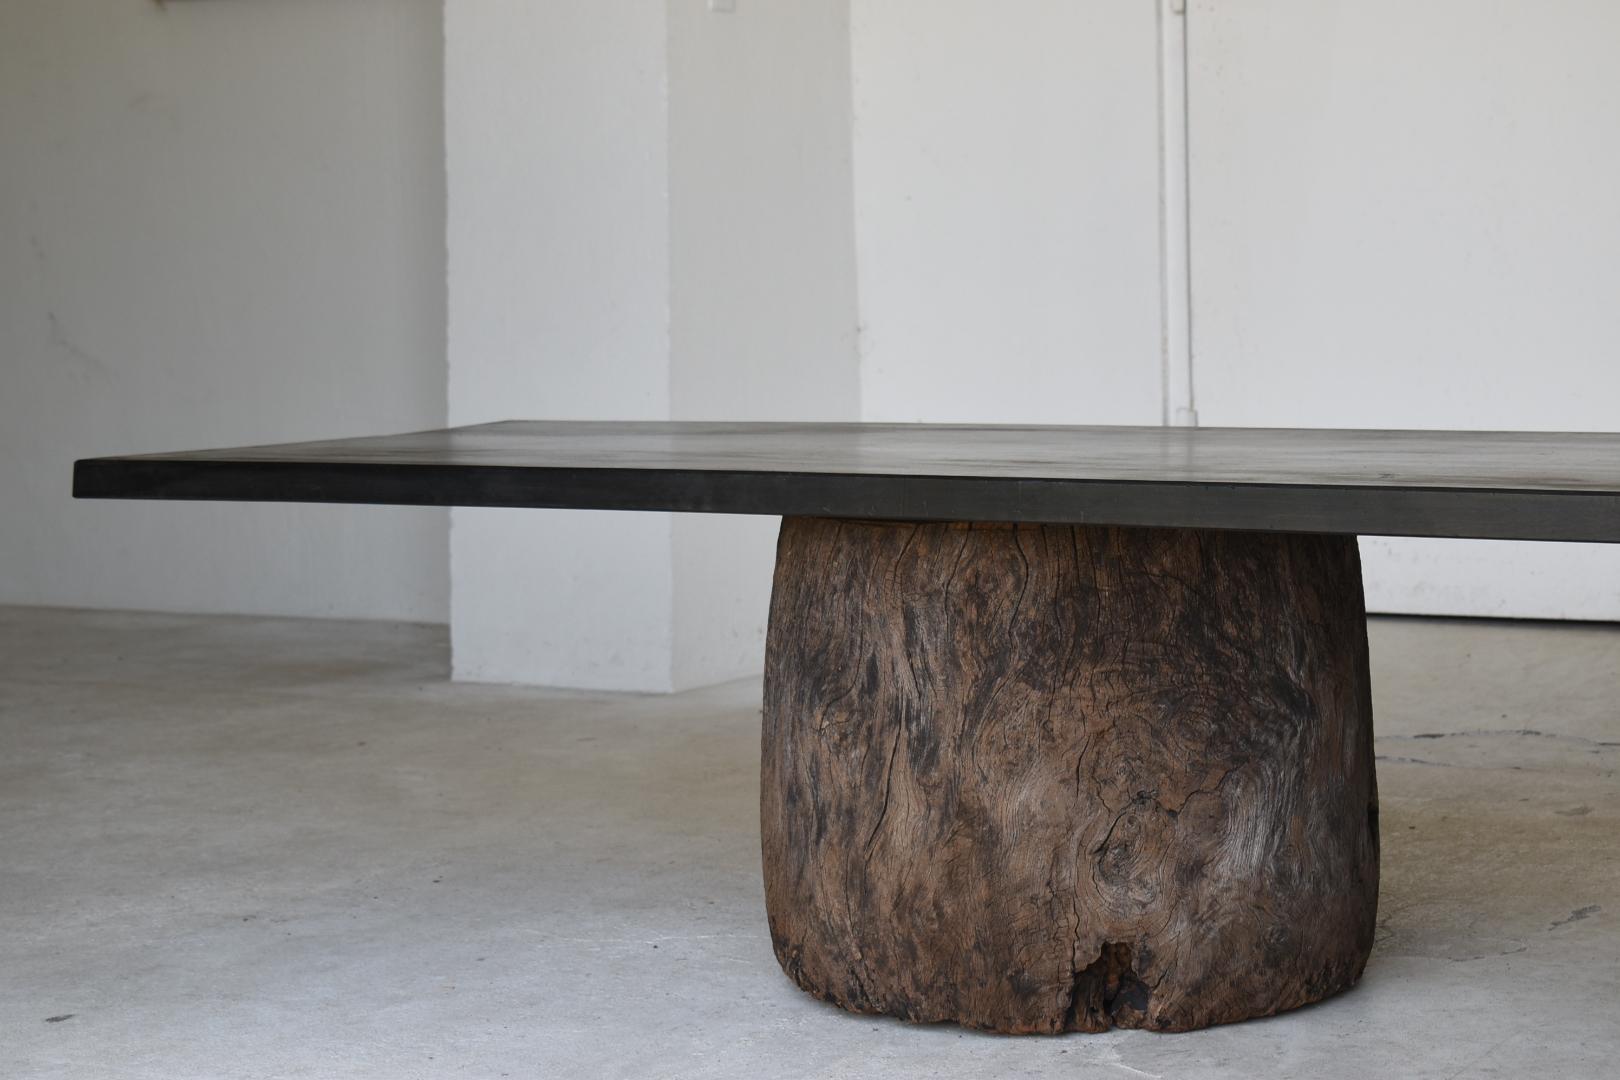 Large table in a very old Japanese primitive style.
It is a simple style with a single board on a stump.
The furniture dates from the Meiji period (1860s-1900s).

The top is made of cedar and the stump is made of zelkova.
Each material is